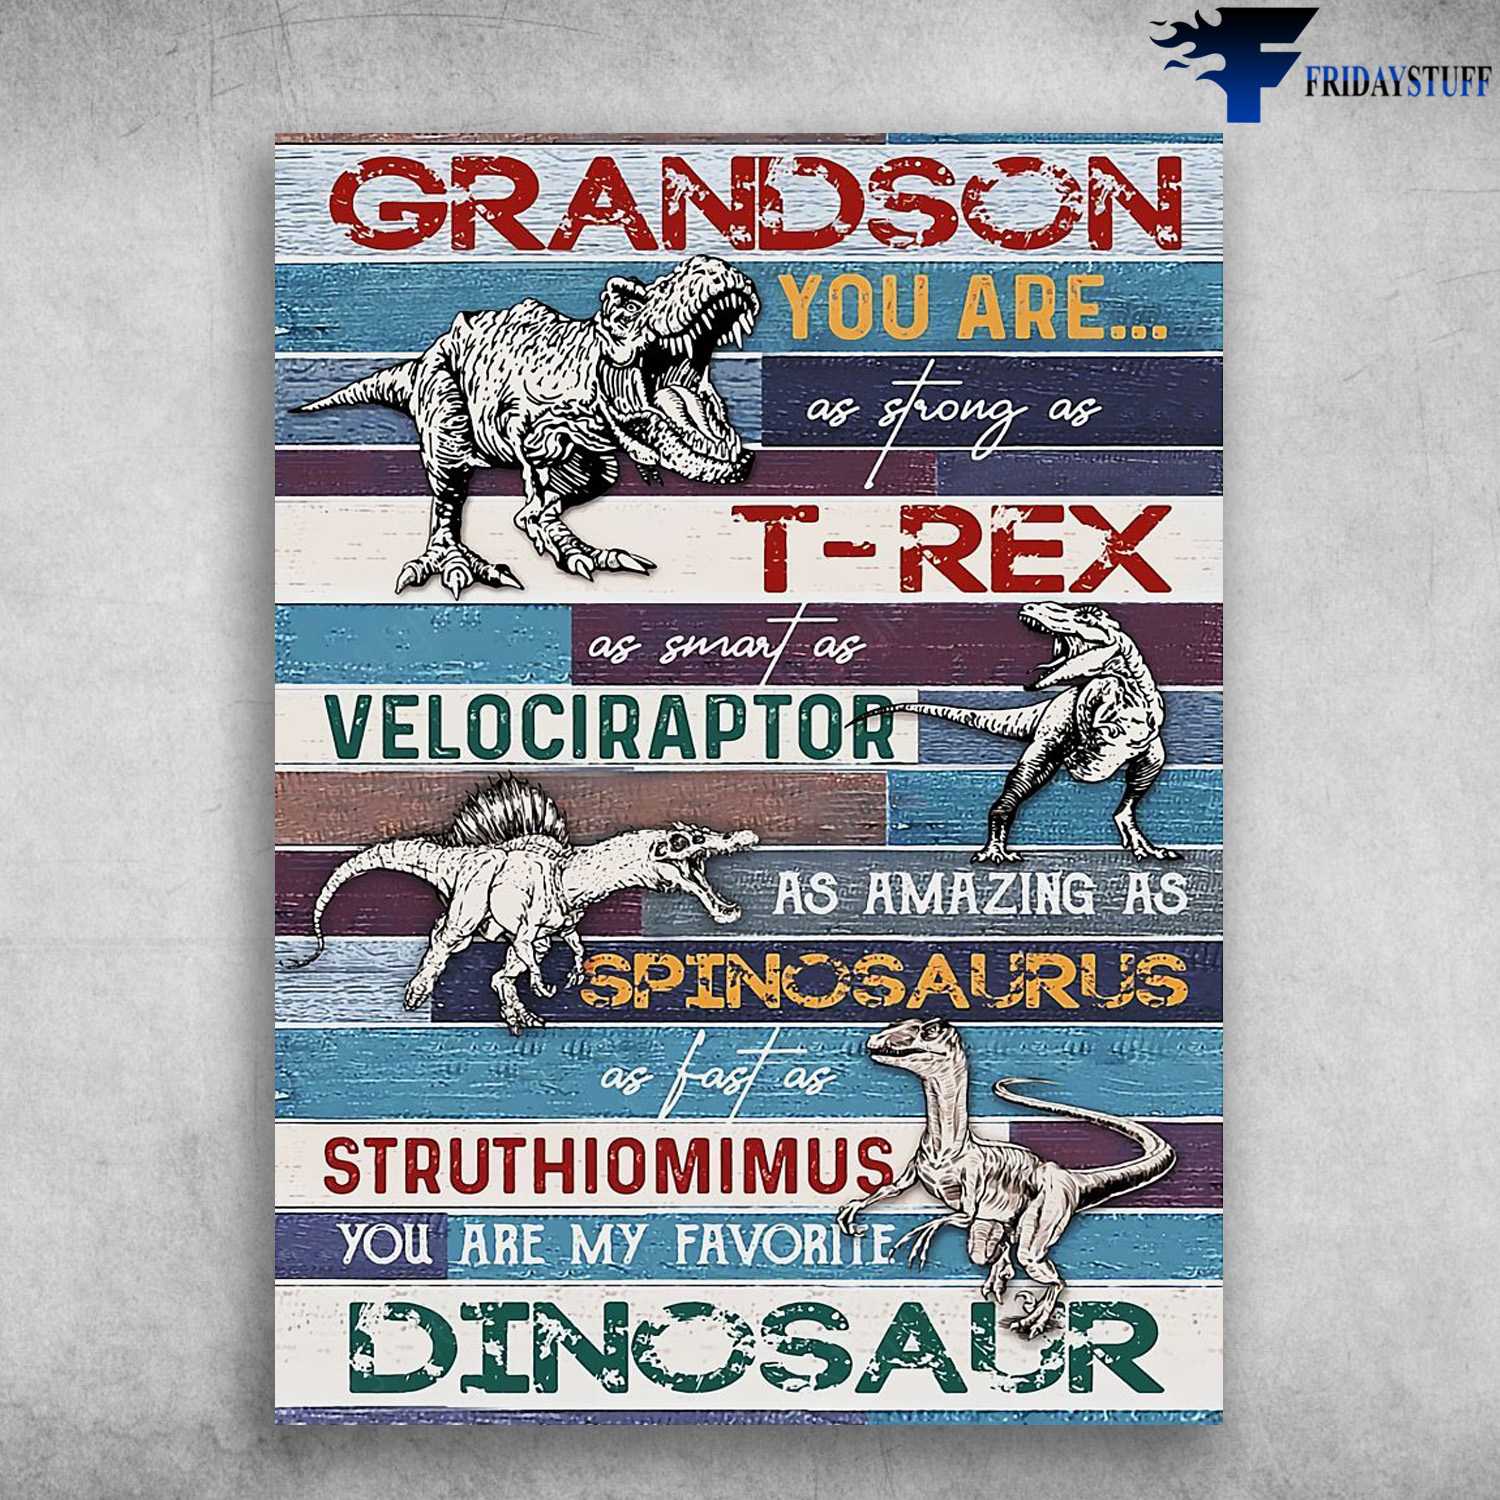 Dinosaur Poster, Grandson You Are As Strong As T-Rex, As Smart As  Velociraptor, As Amazing As Spinosaurus - FridayStuff